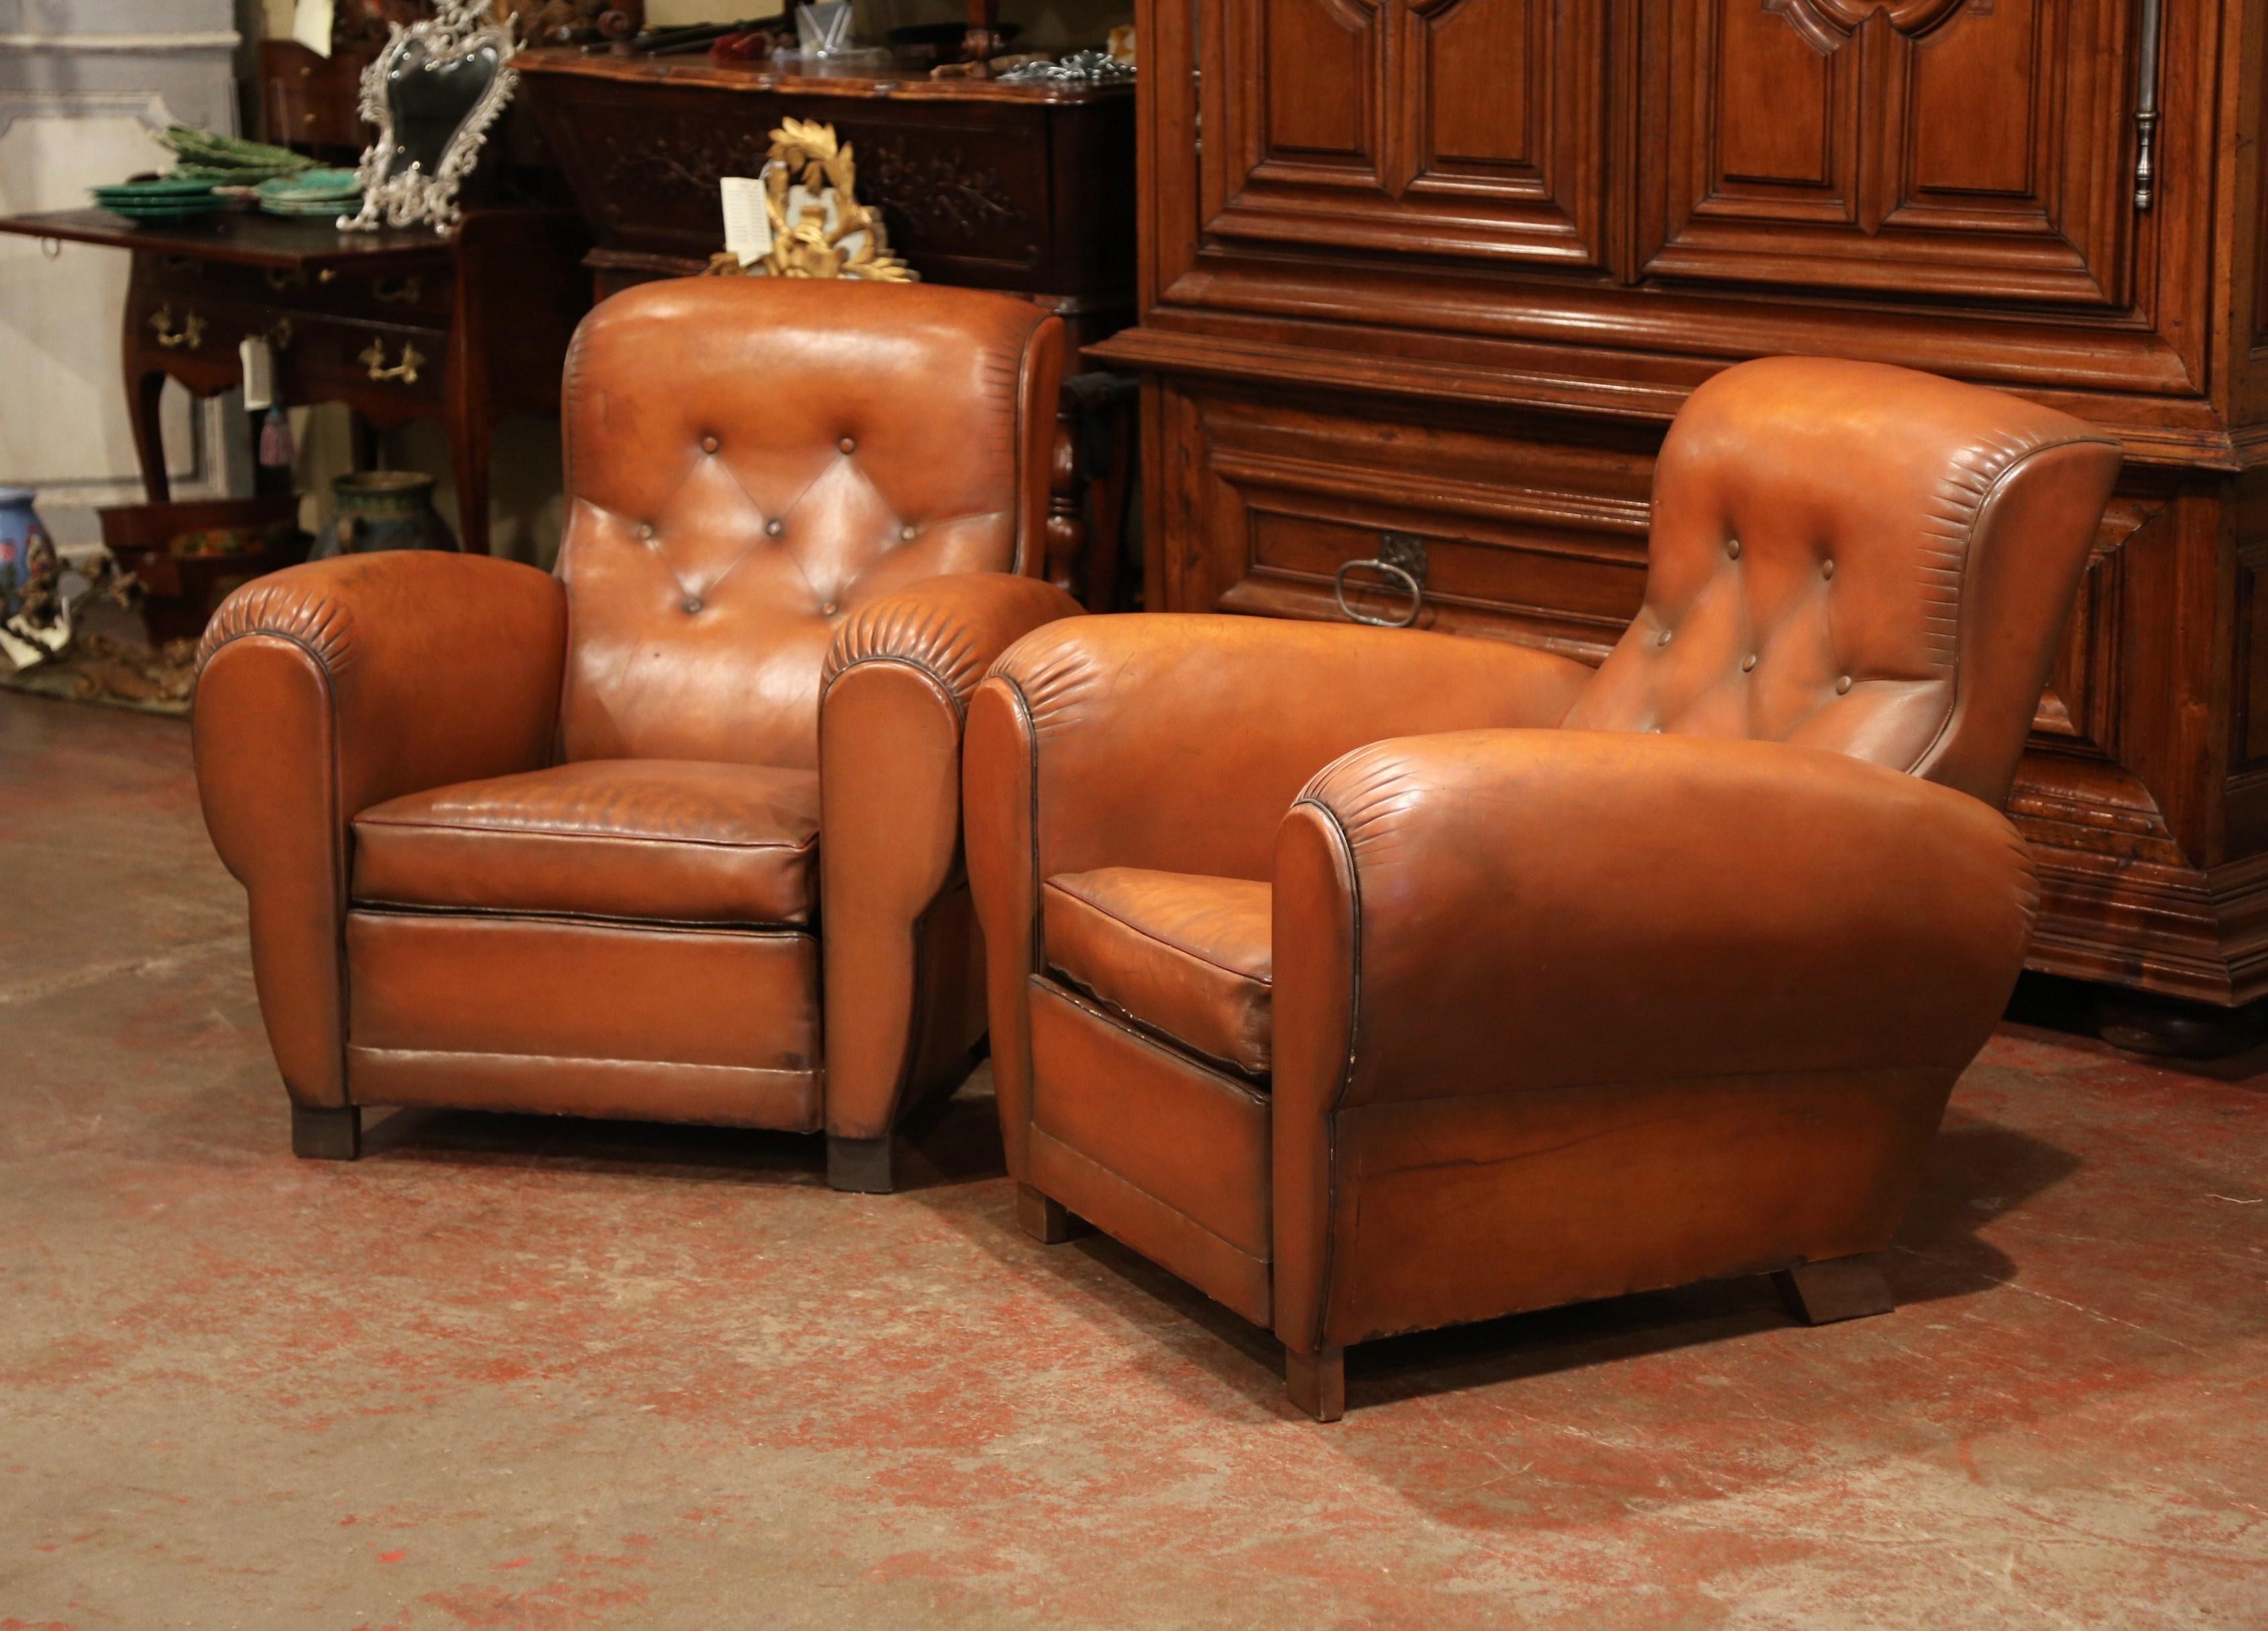 These cozy, antique Art Deco club chairs were crafted in France, circa 1920. The stately, masculine chairs feature wide, rounded armrests, a pitched back with ear shaped sides, and square wooden feet at the base. The comfortable armchairs are in